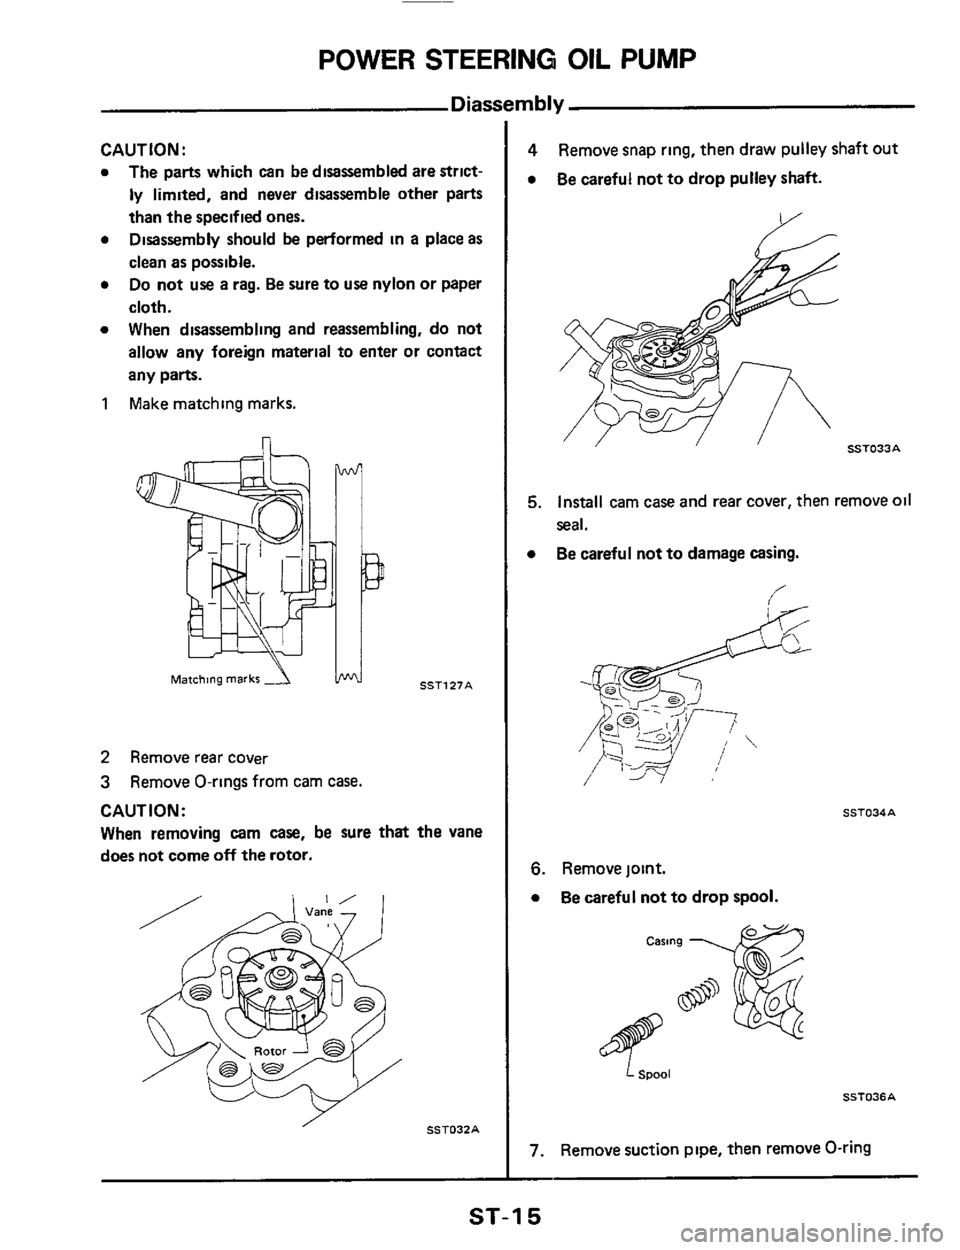 NISSAN 300ZX 1984 Z31 Steering System User Guide POWER STEERING OIL PUMP 
Diassernbl y 
CAUTION: 
a The  parts which can be disassembled  are strict- 
ly limited,  and never  disassemble  other parts 
than  the specified  ones. 
Disassembly  should 